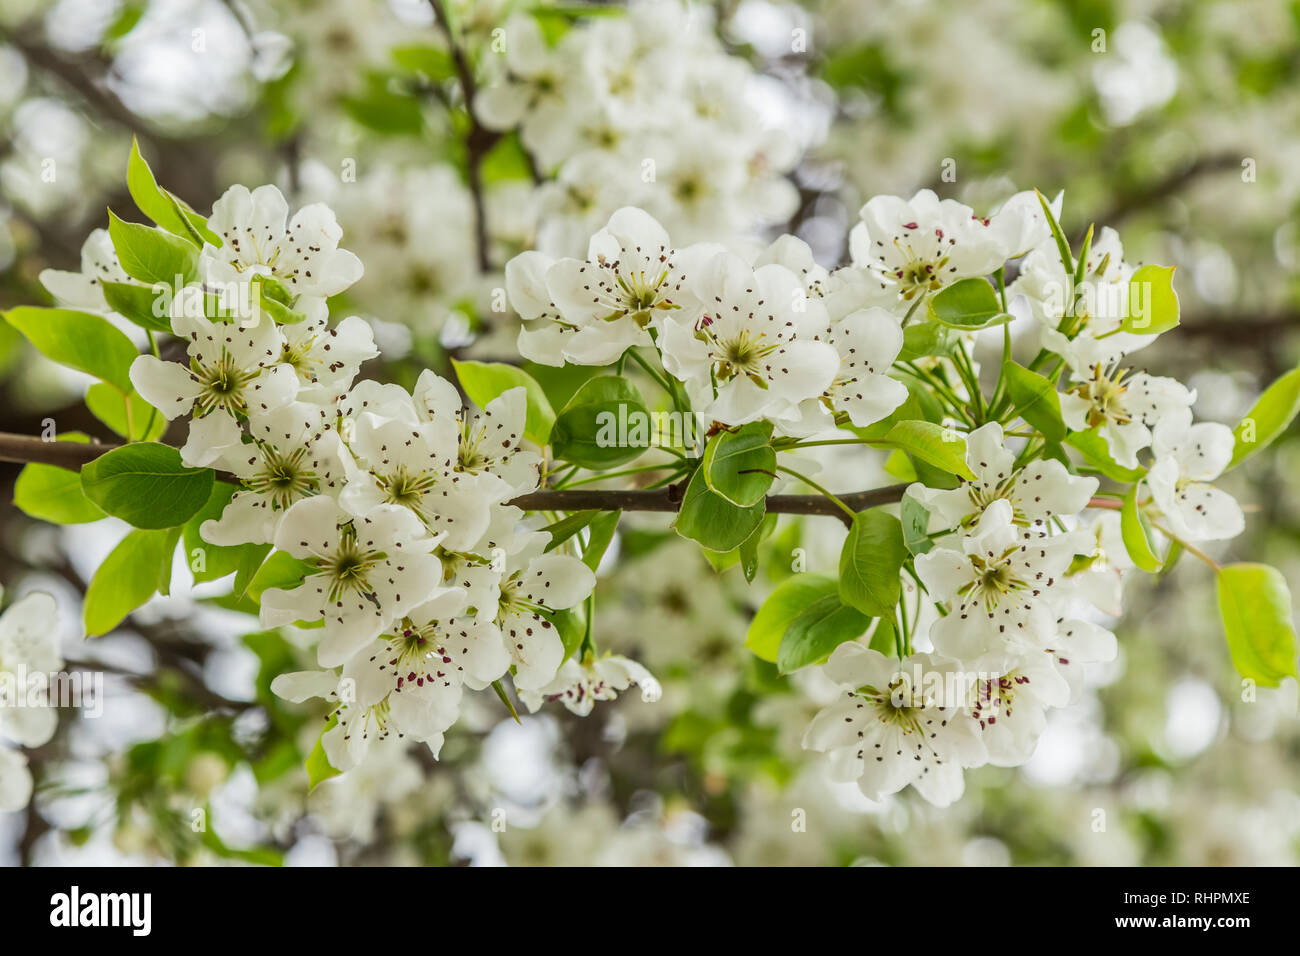 Flowering pear (Pyrus calleryana). This family of ornamental trees produces white spring blossom and glorious autumn foliage. Stock Photo